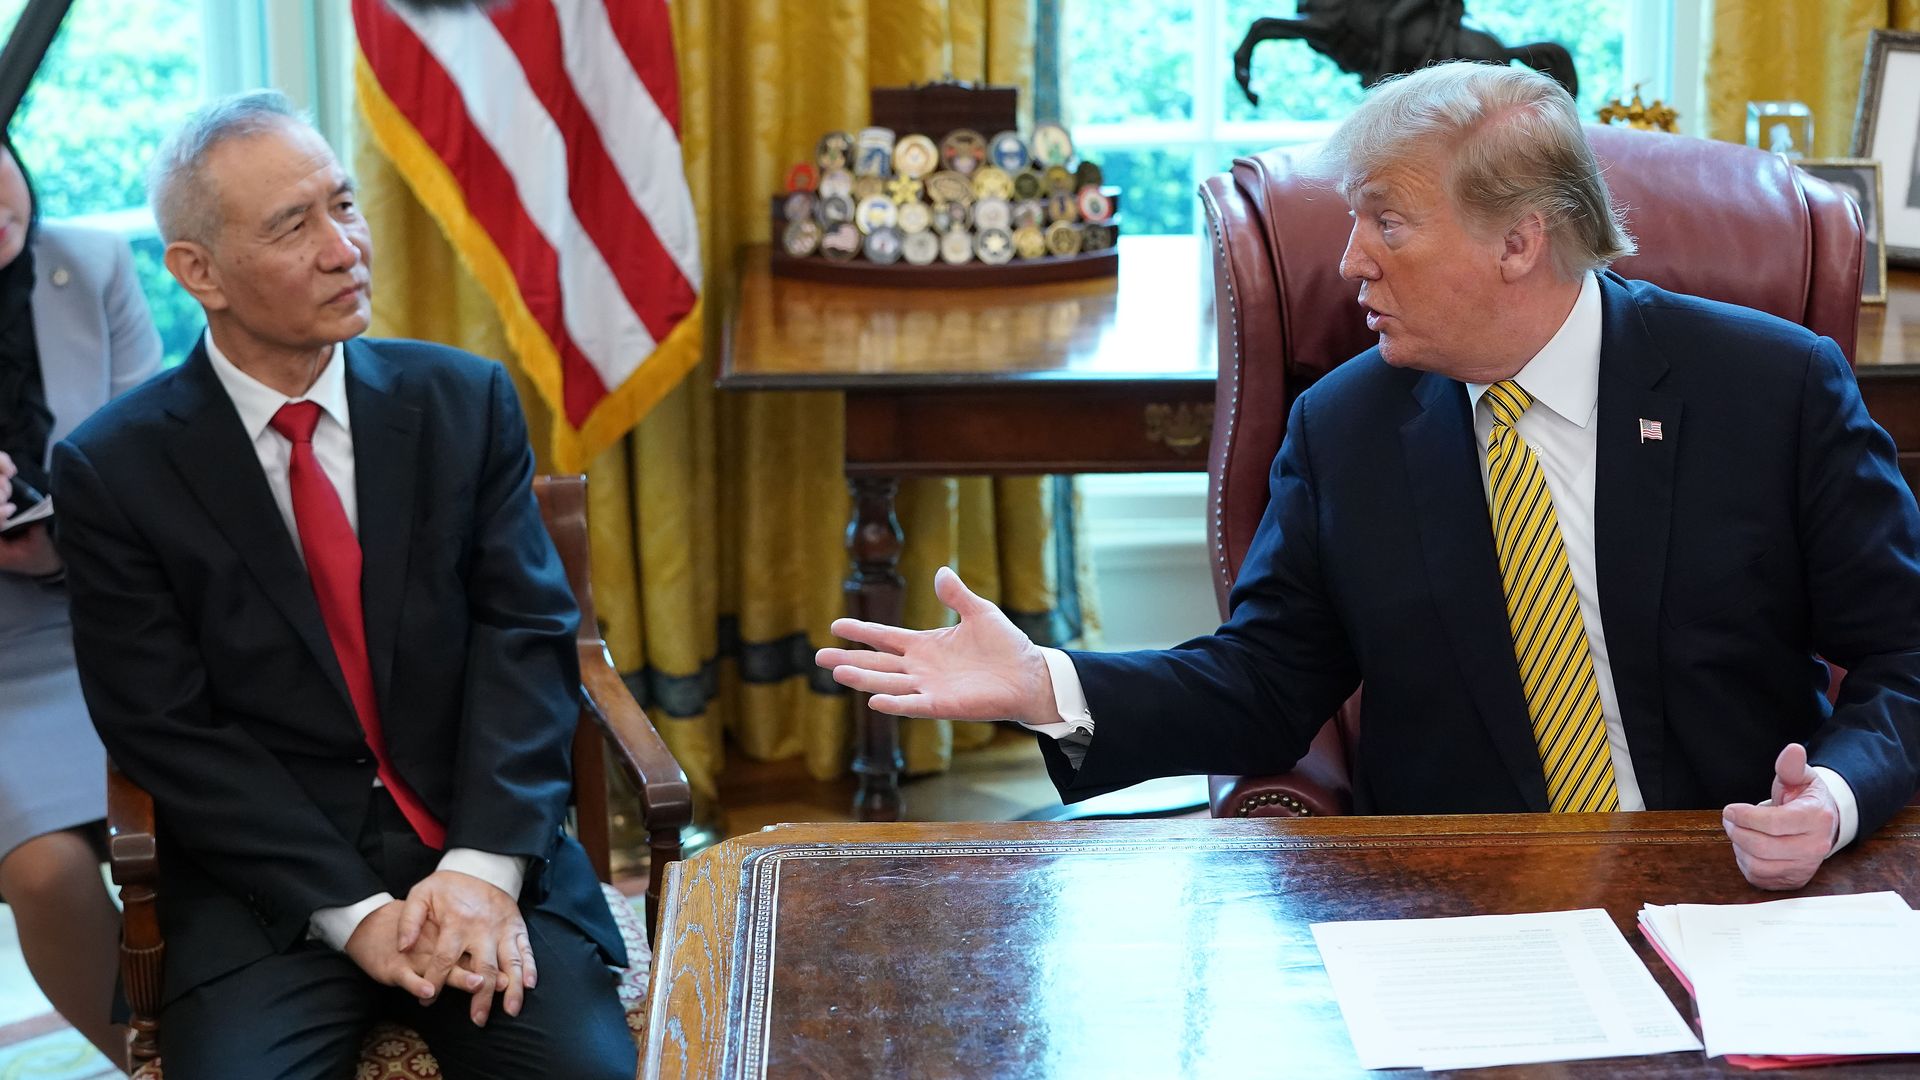 President Trump Meets With Vice Premier Of China At The White House